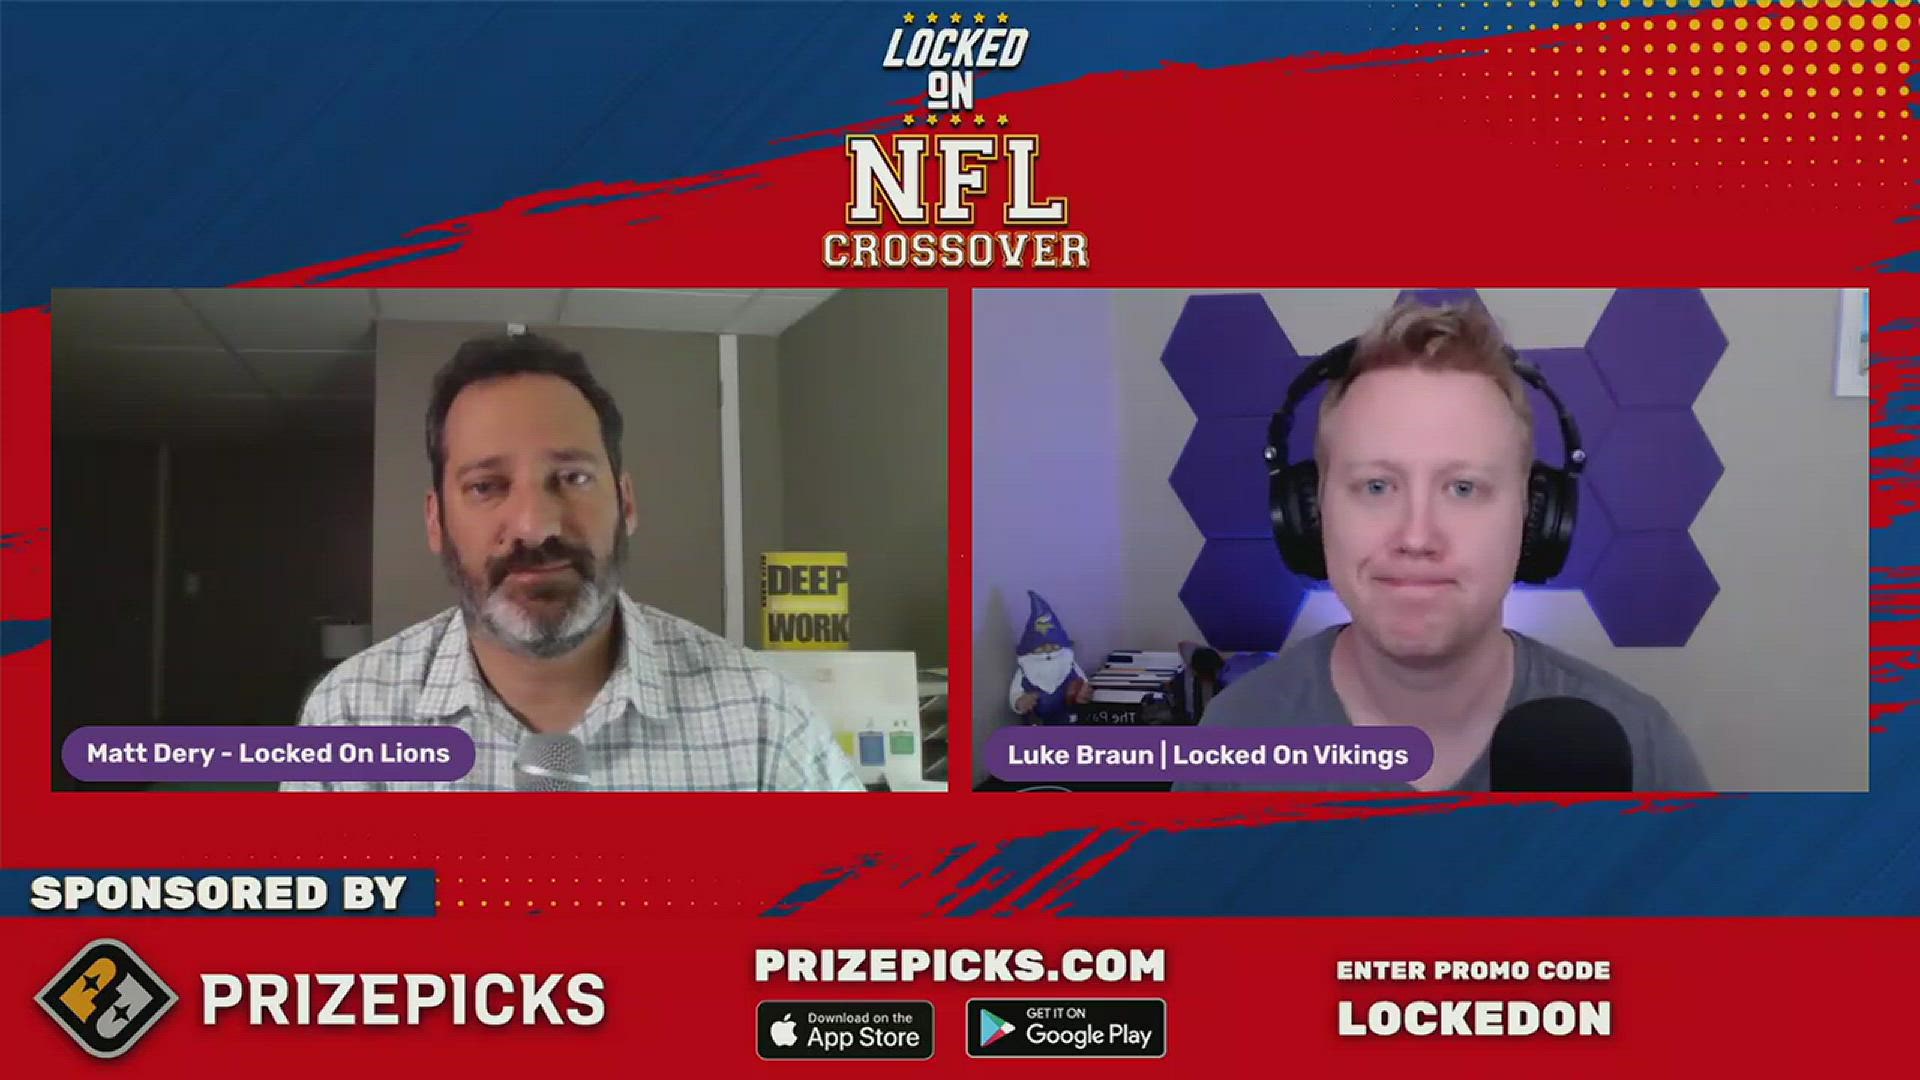 Matt Dery and Luke Braun preview this week's showdown for 1st place in the NFC North. What are the key matchups for Sunday and what should we expect from both teams?